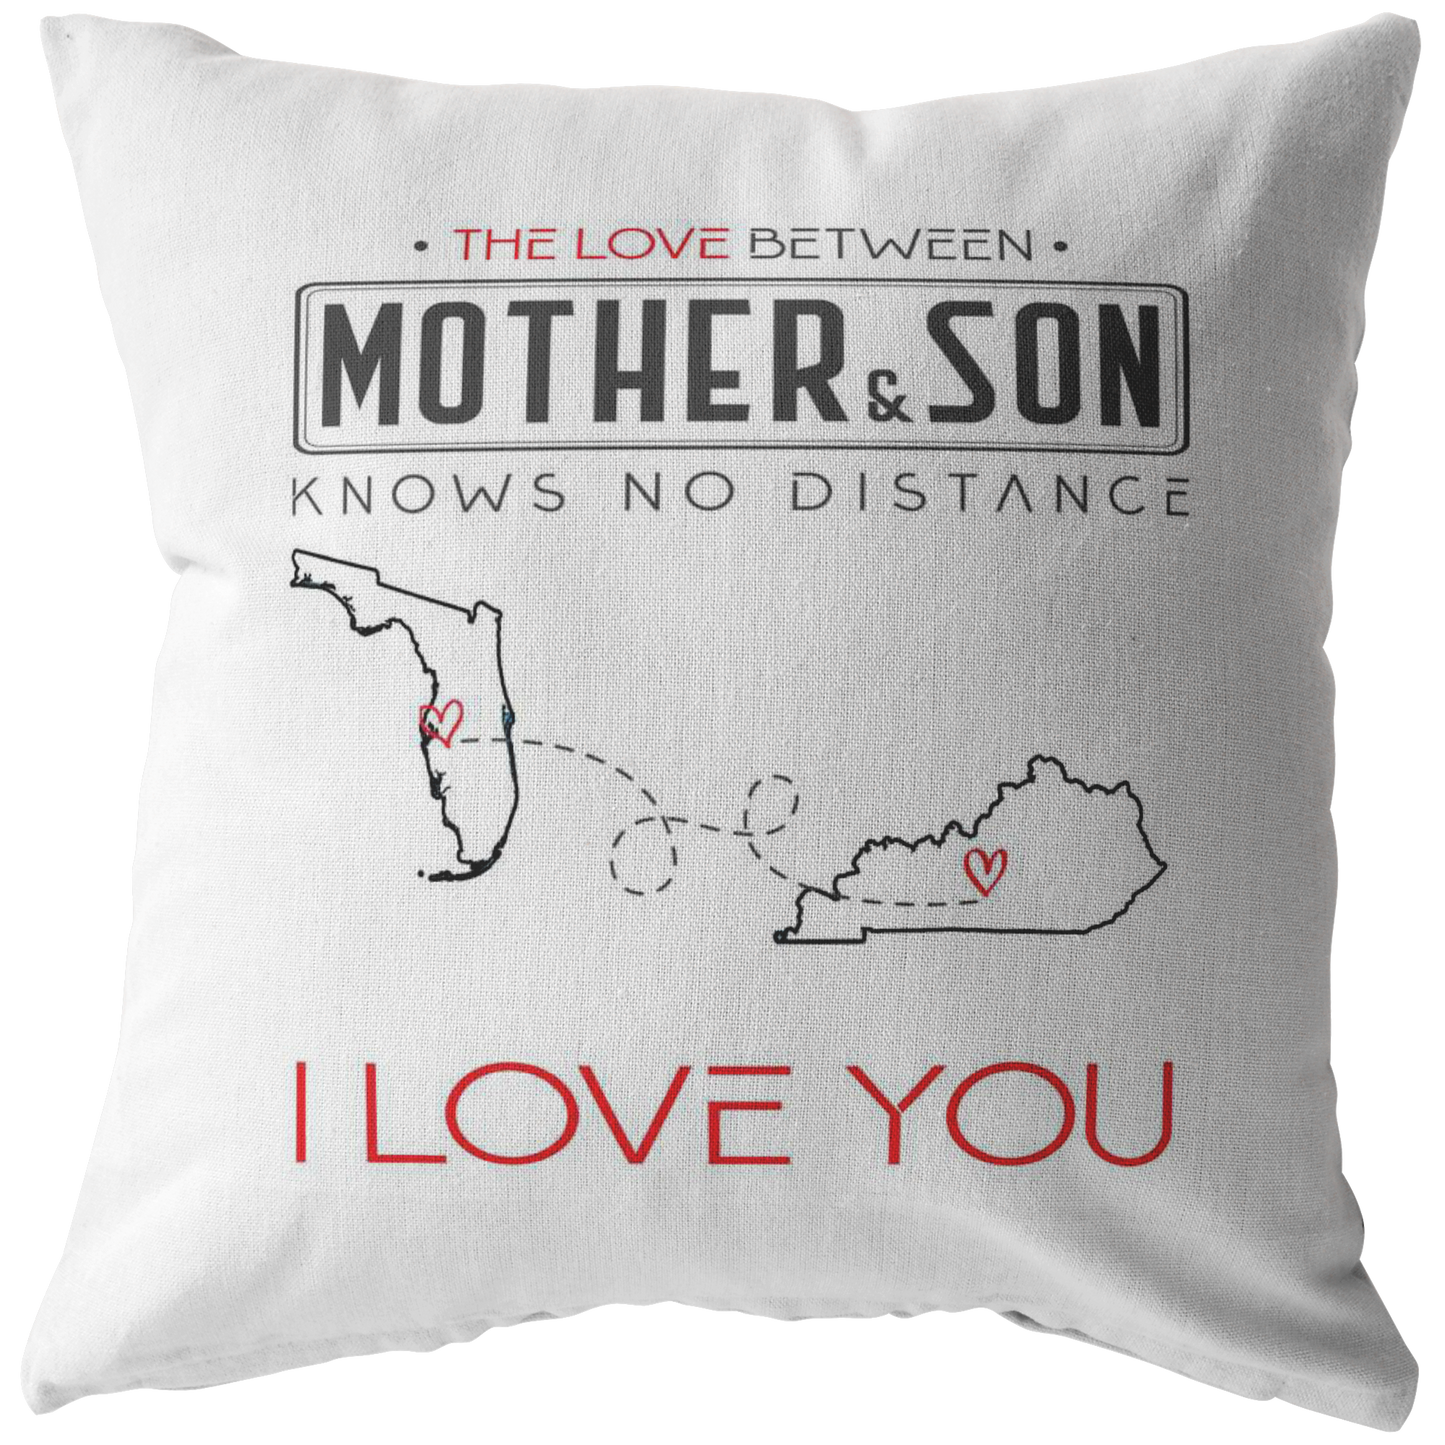 ND-pl20419718-sp-18899 - Mothers Day Gifts For Mom - The Love Between Mother  Son K